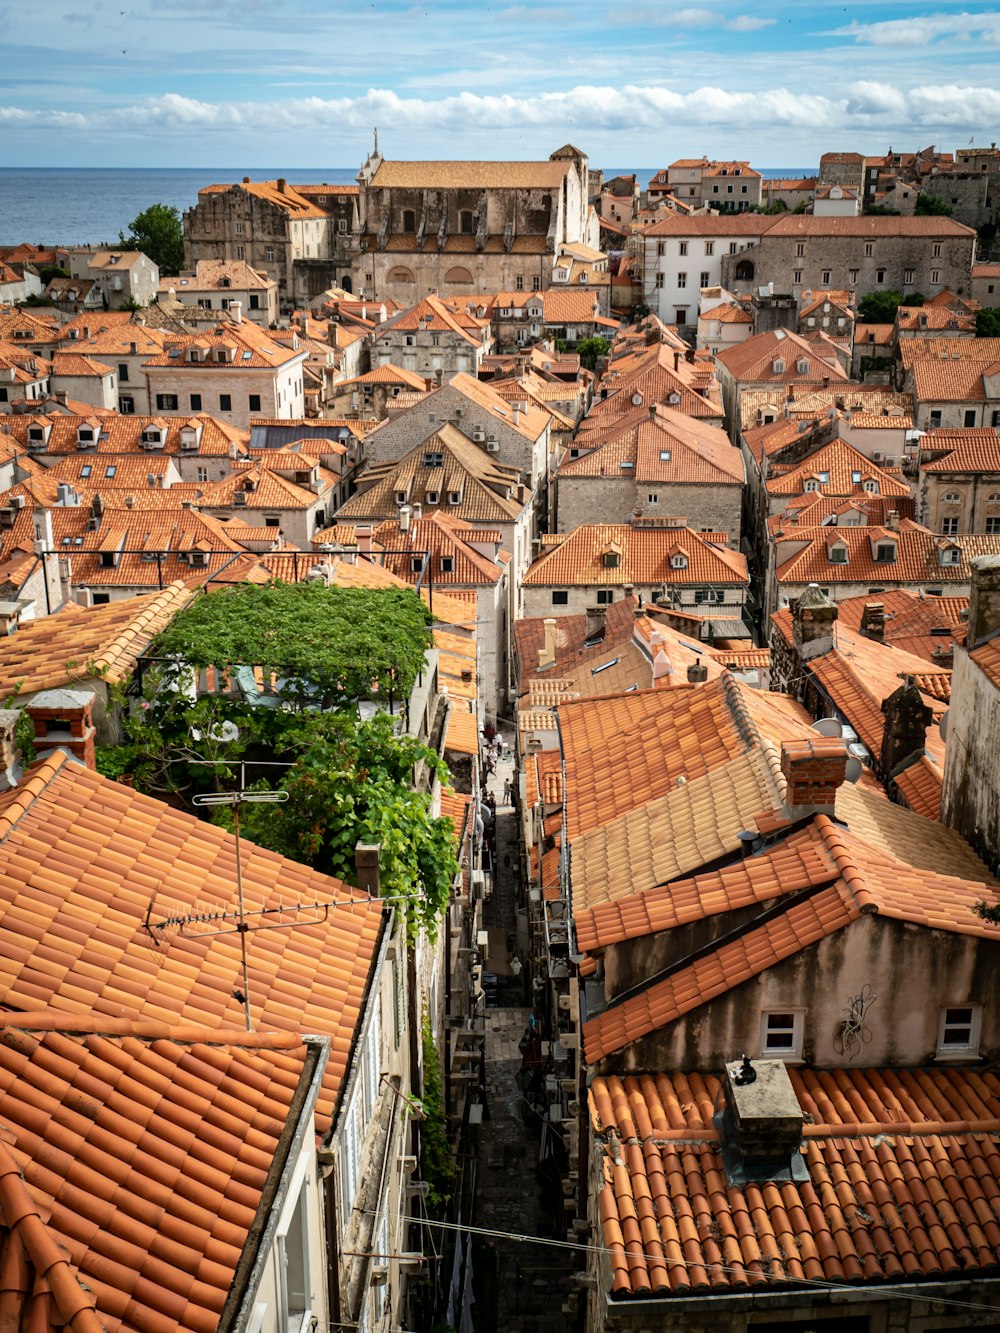 an aerial view of a city with red tiled roofs